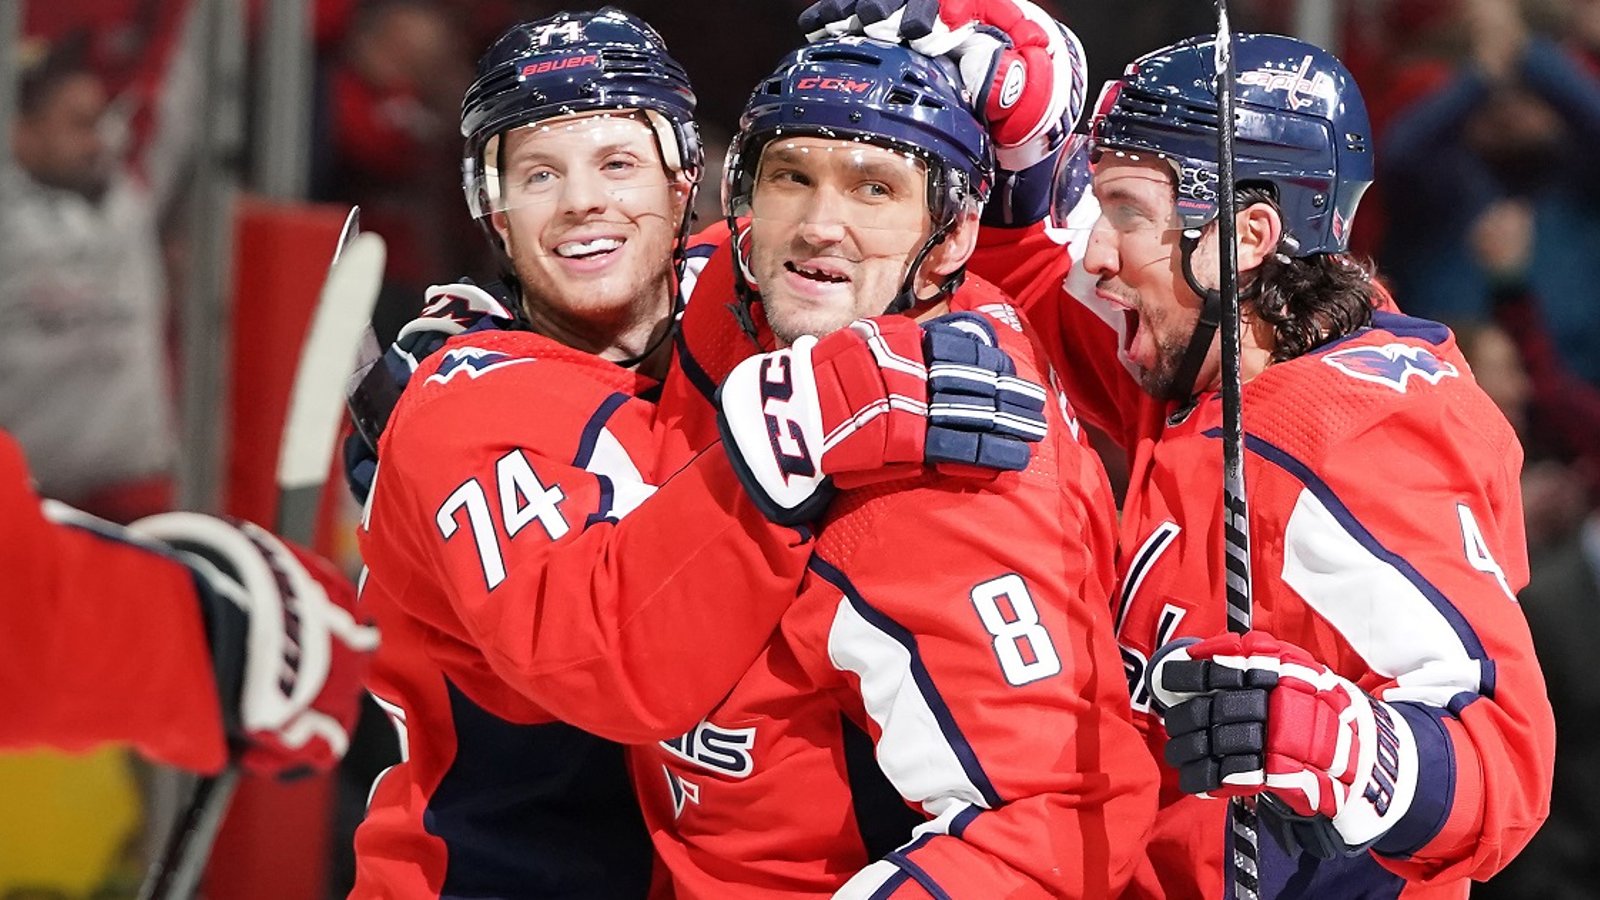 Ovechkin mic'd up for goal #700.